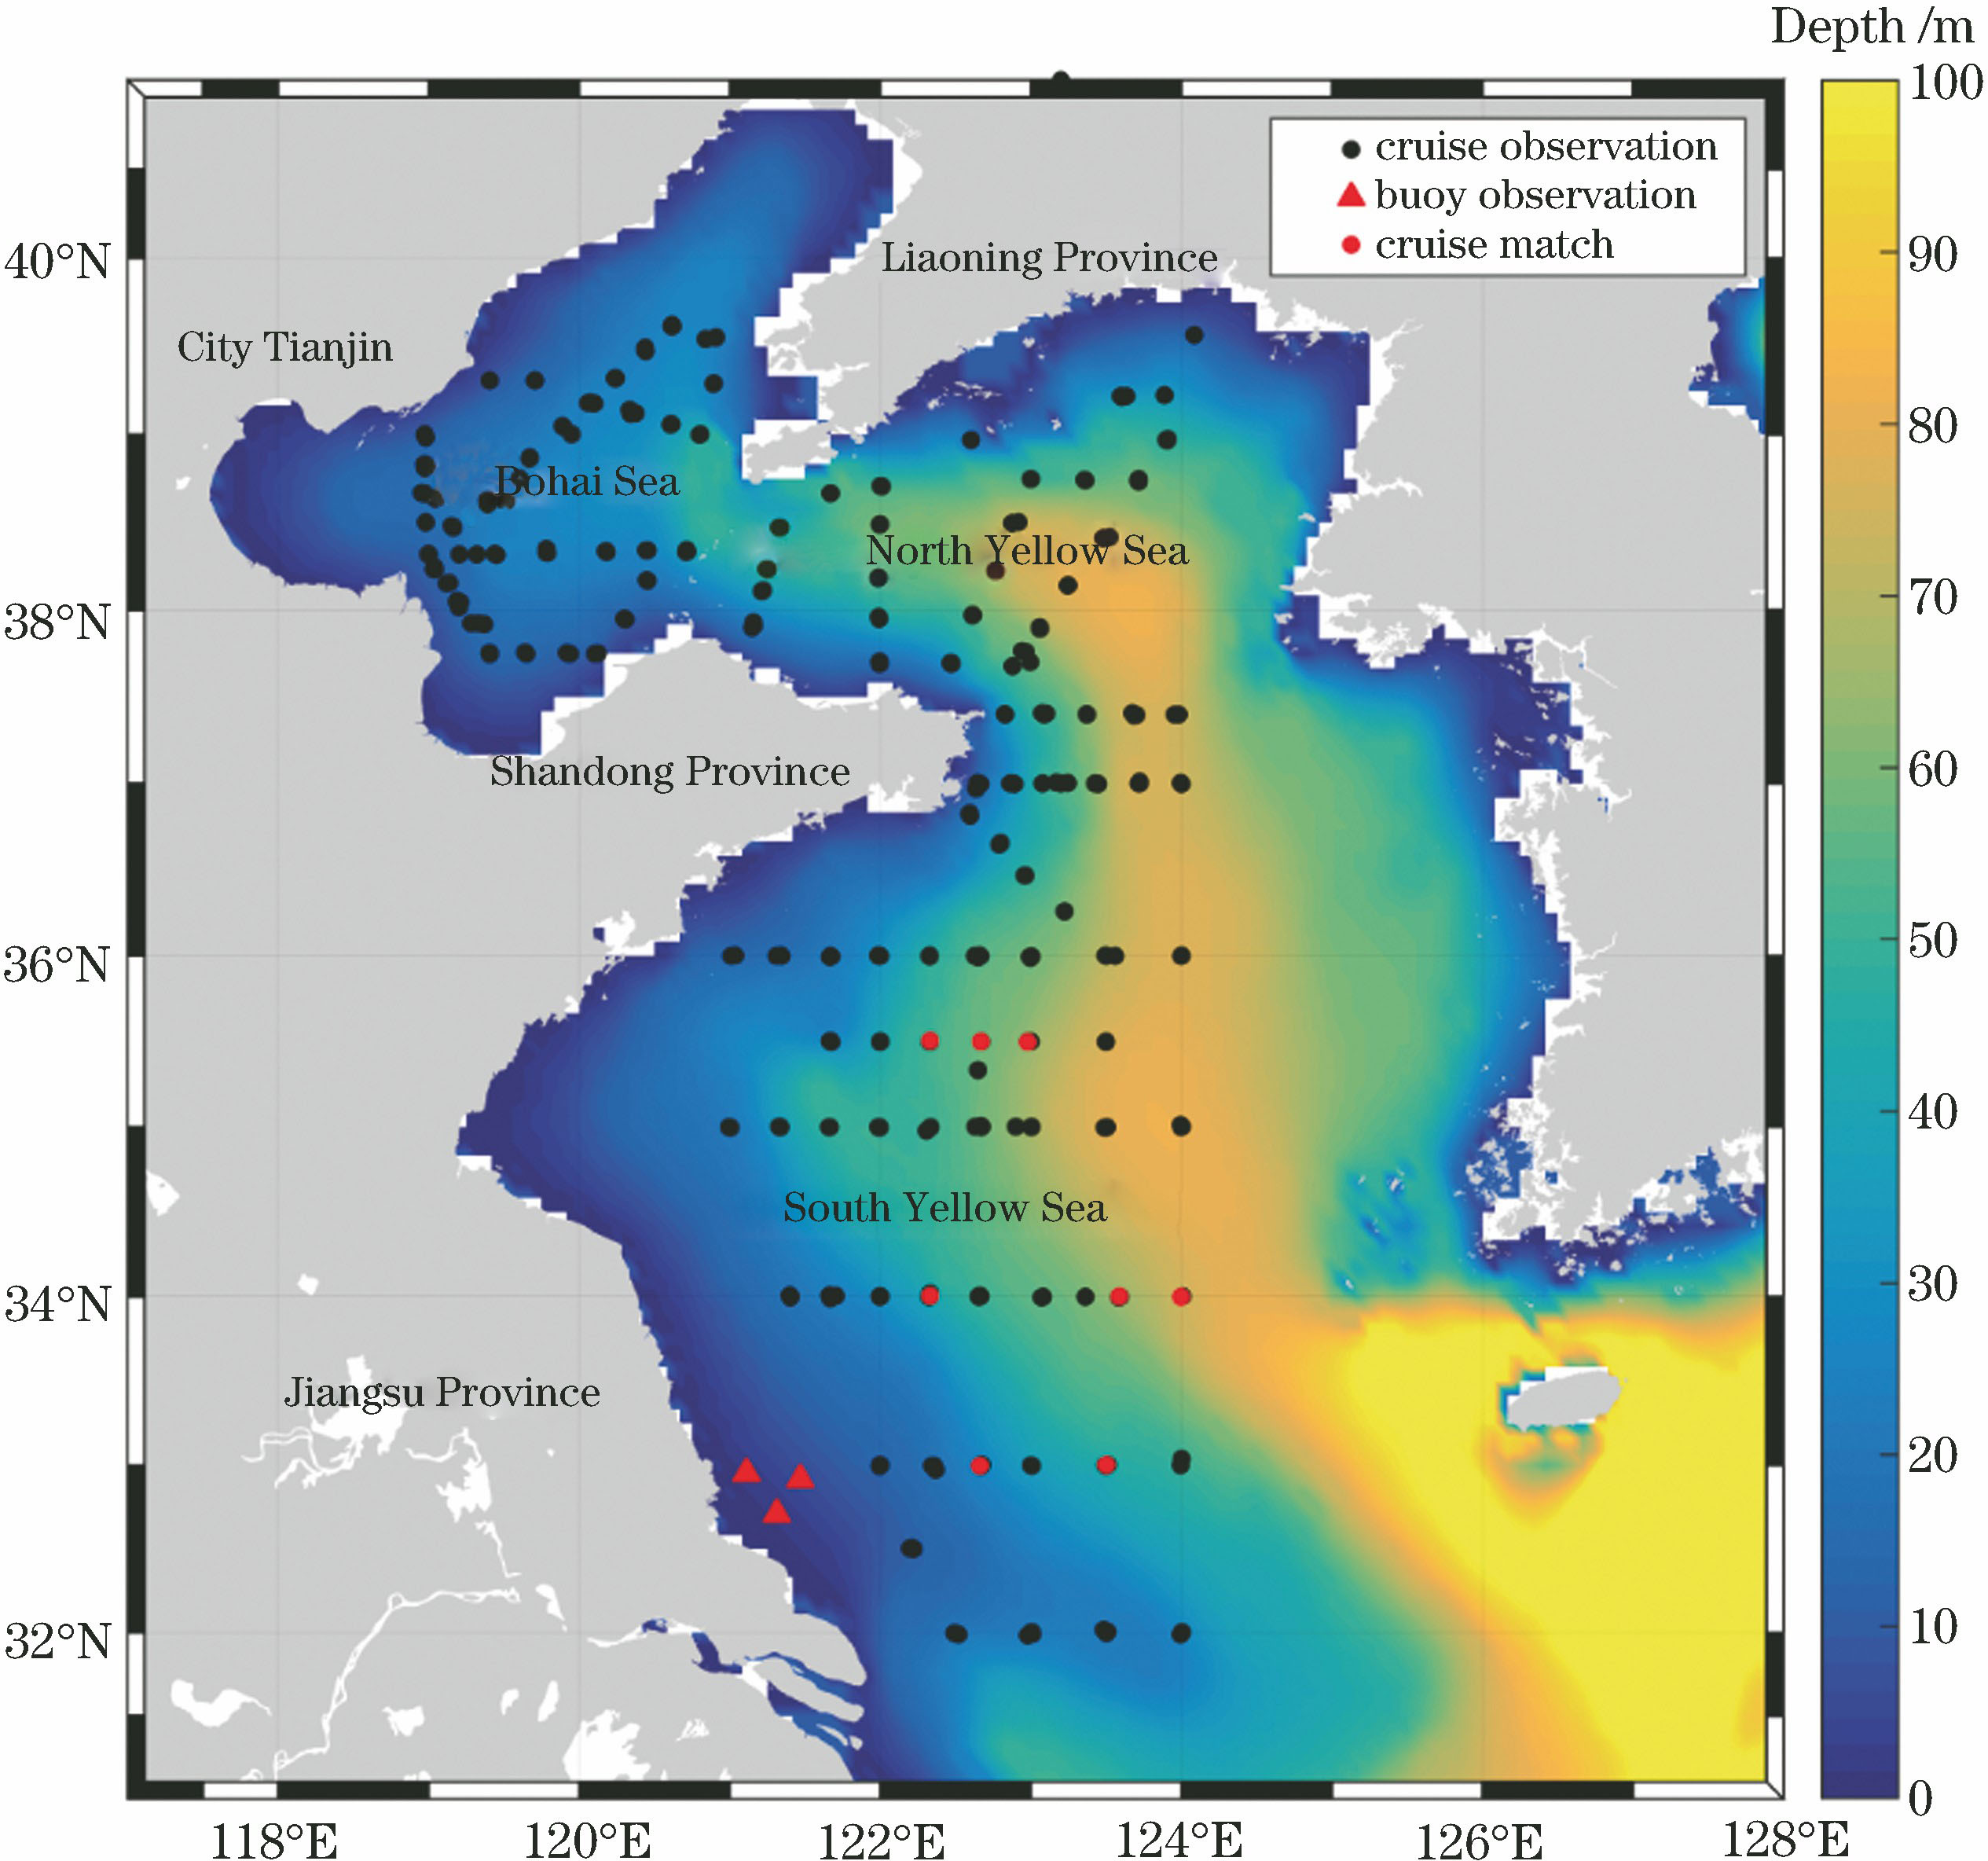 Study area, location of buoy, and sampling stations of different cruises